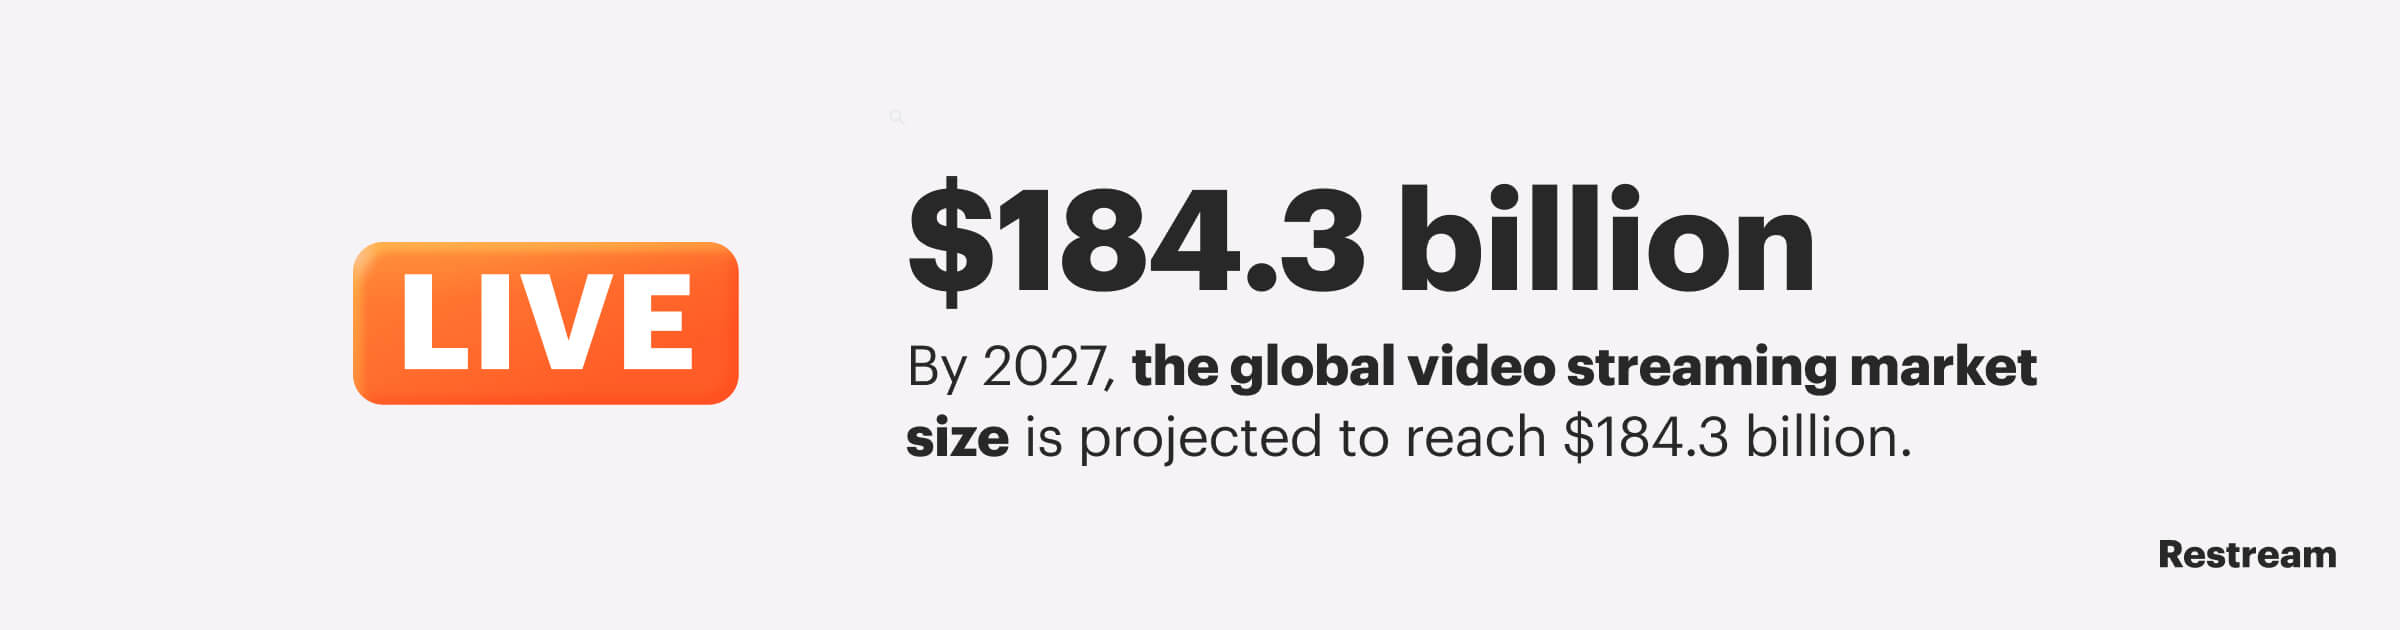 Size of video streaming market size by 2027